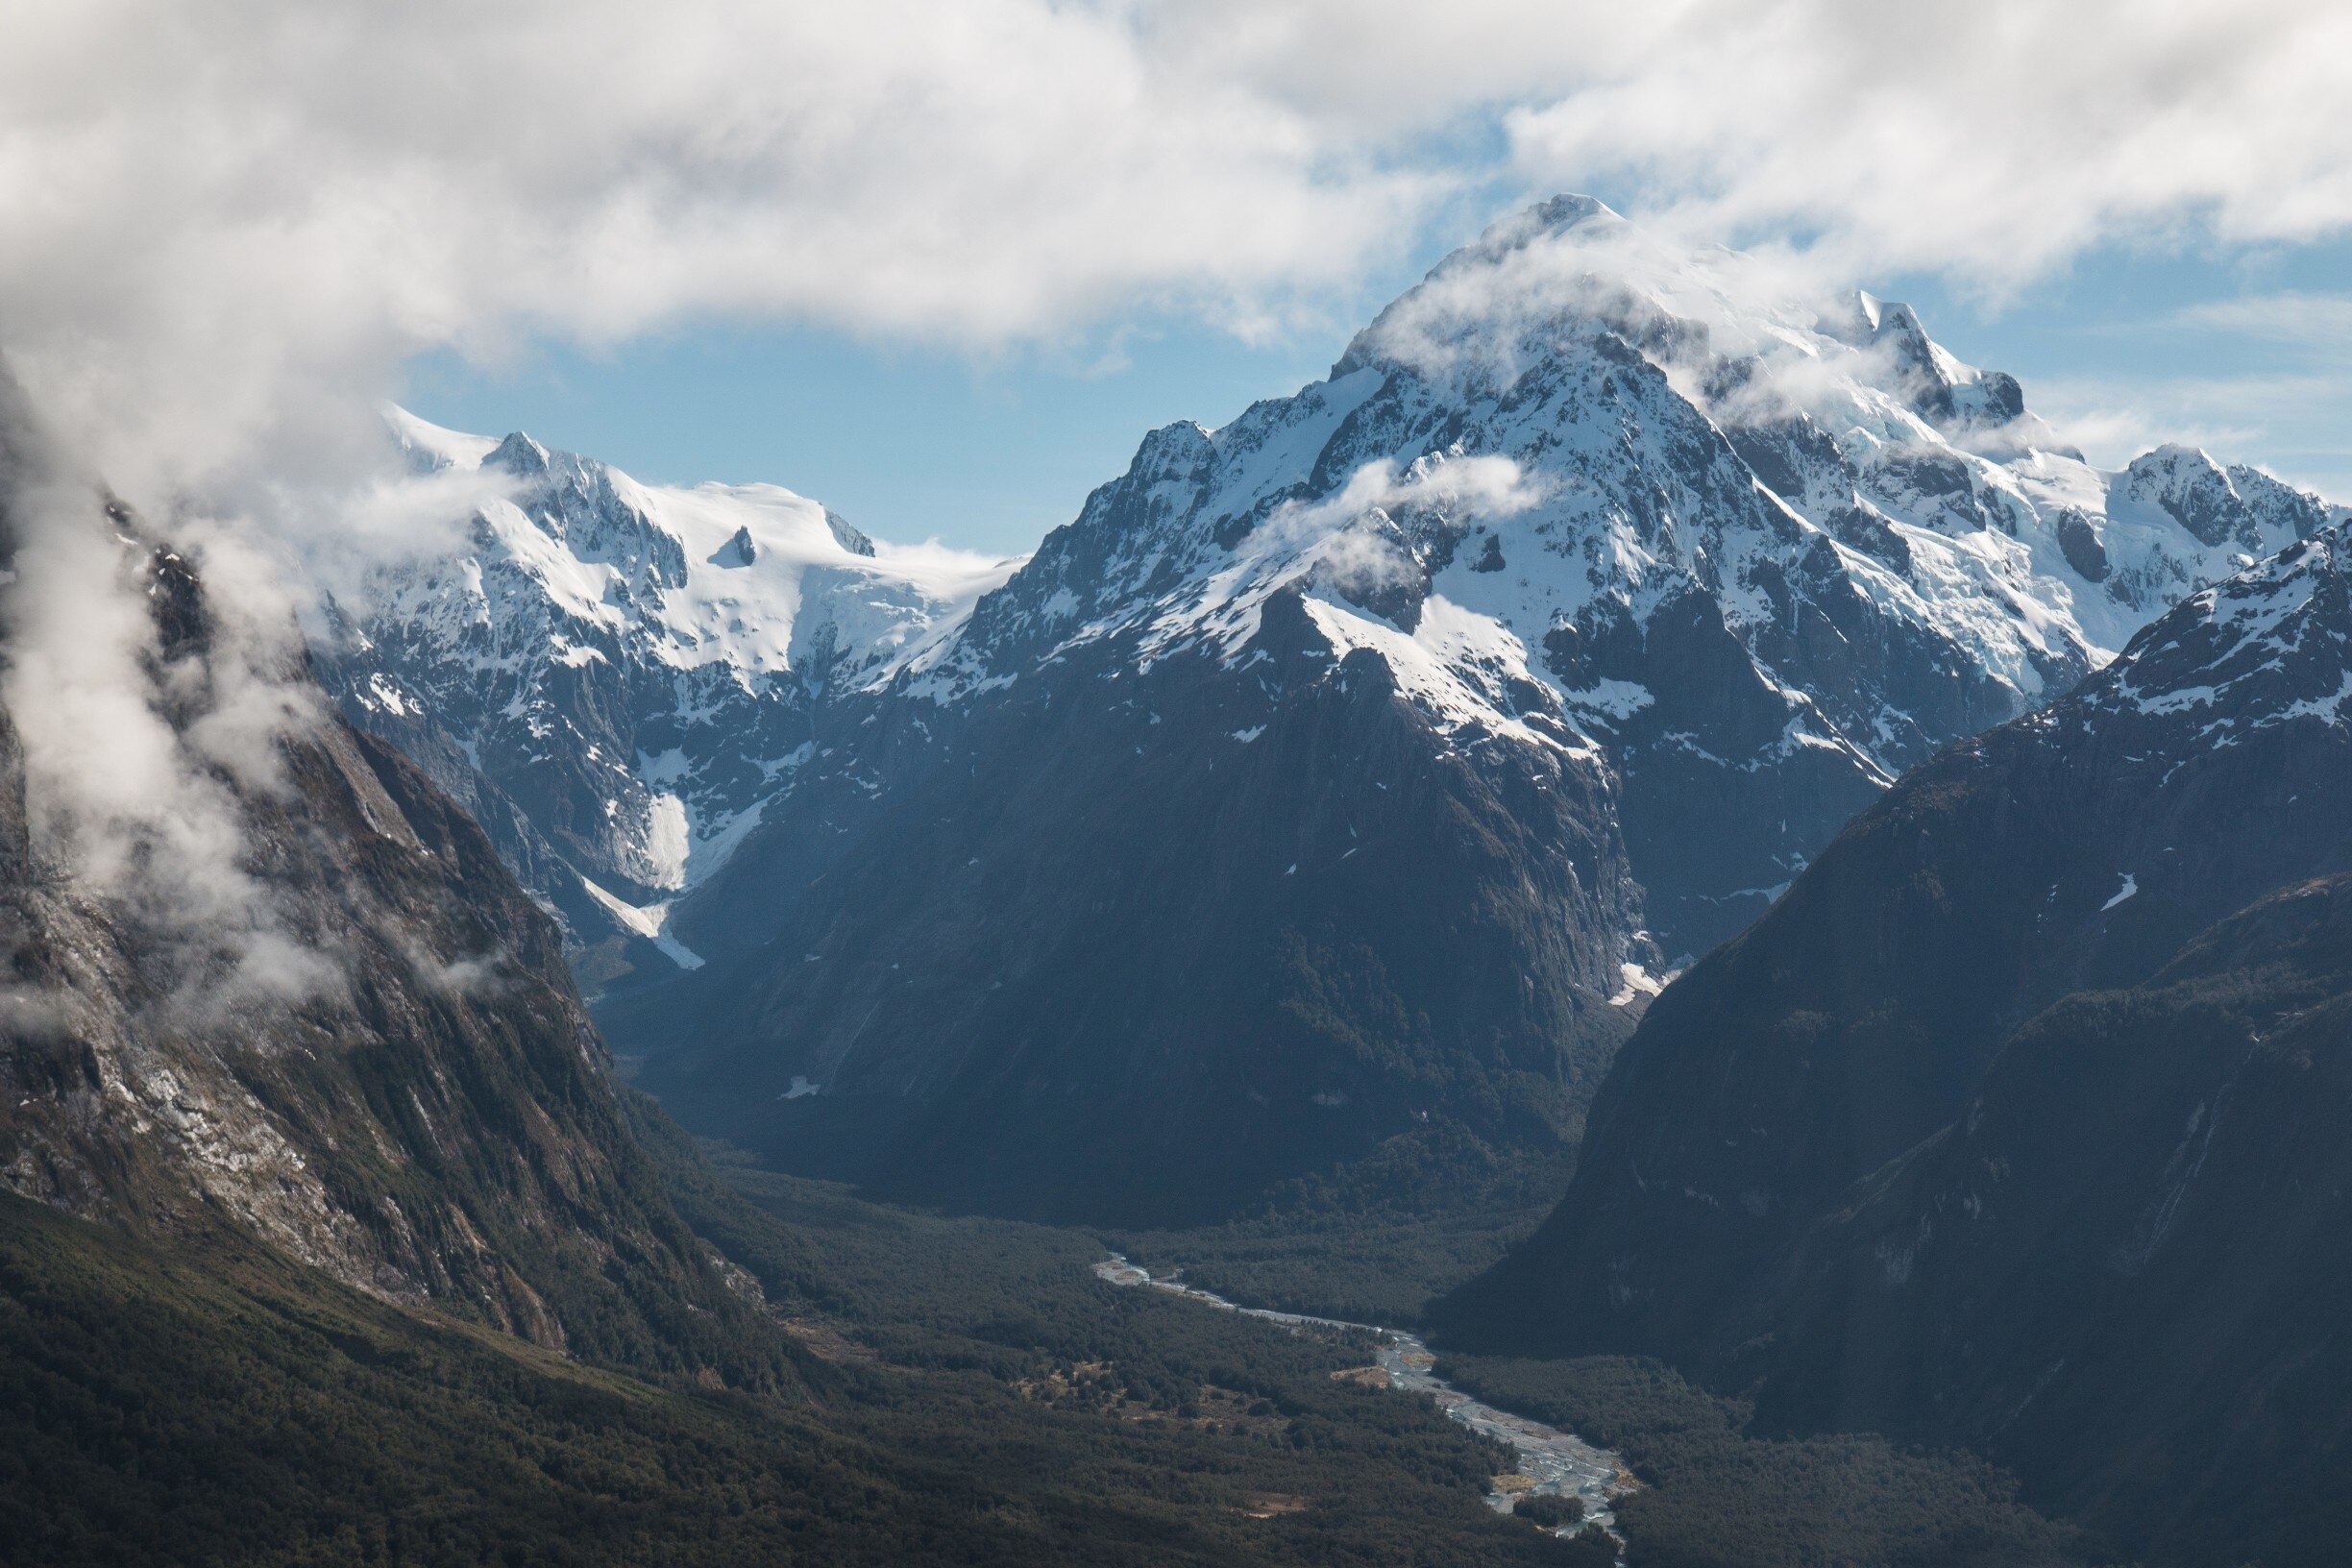 If you can afford it, I recommend splurging on a helicopter flight or fixed wing plane ride to Milford from Queenstown or Wanaka. The views of Fiordland from above are unbeatable. 